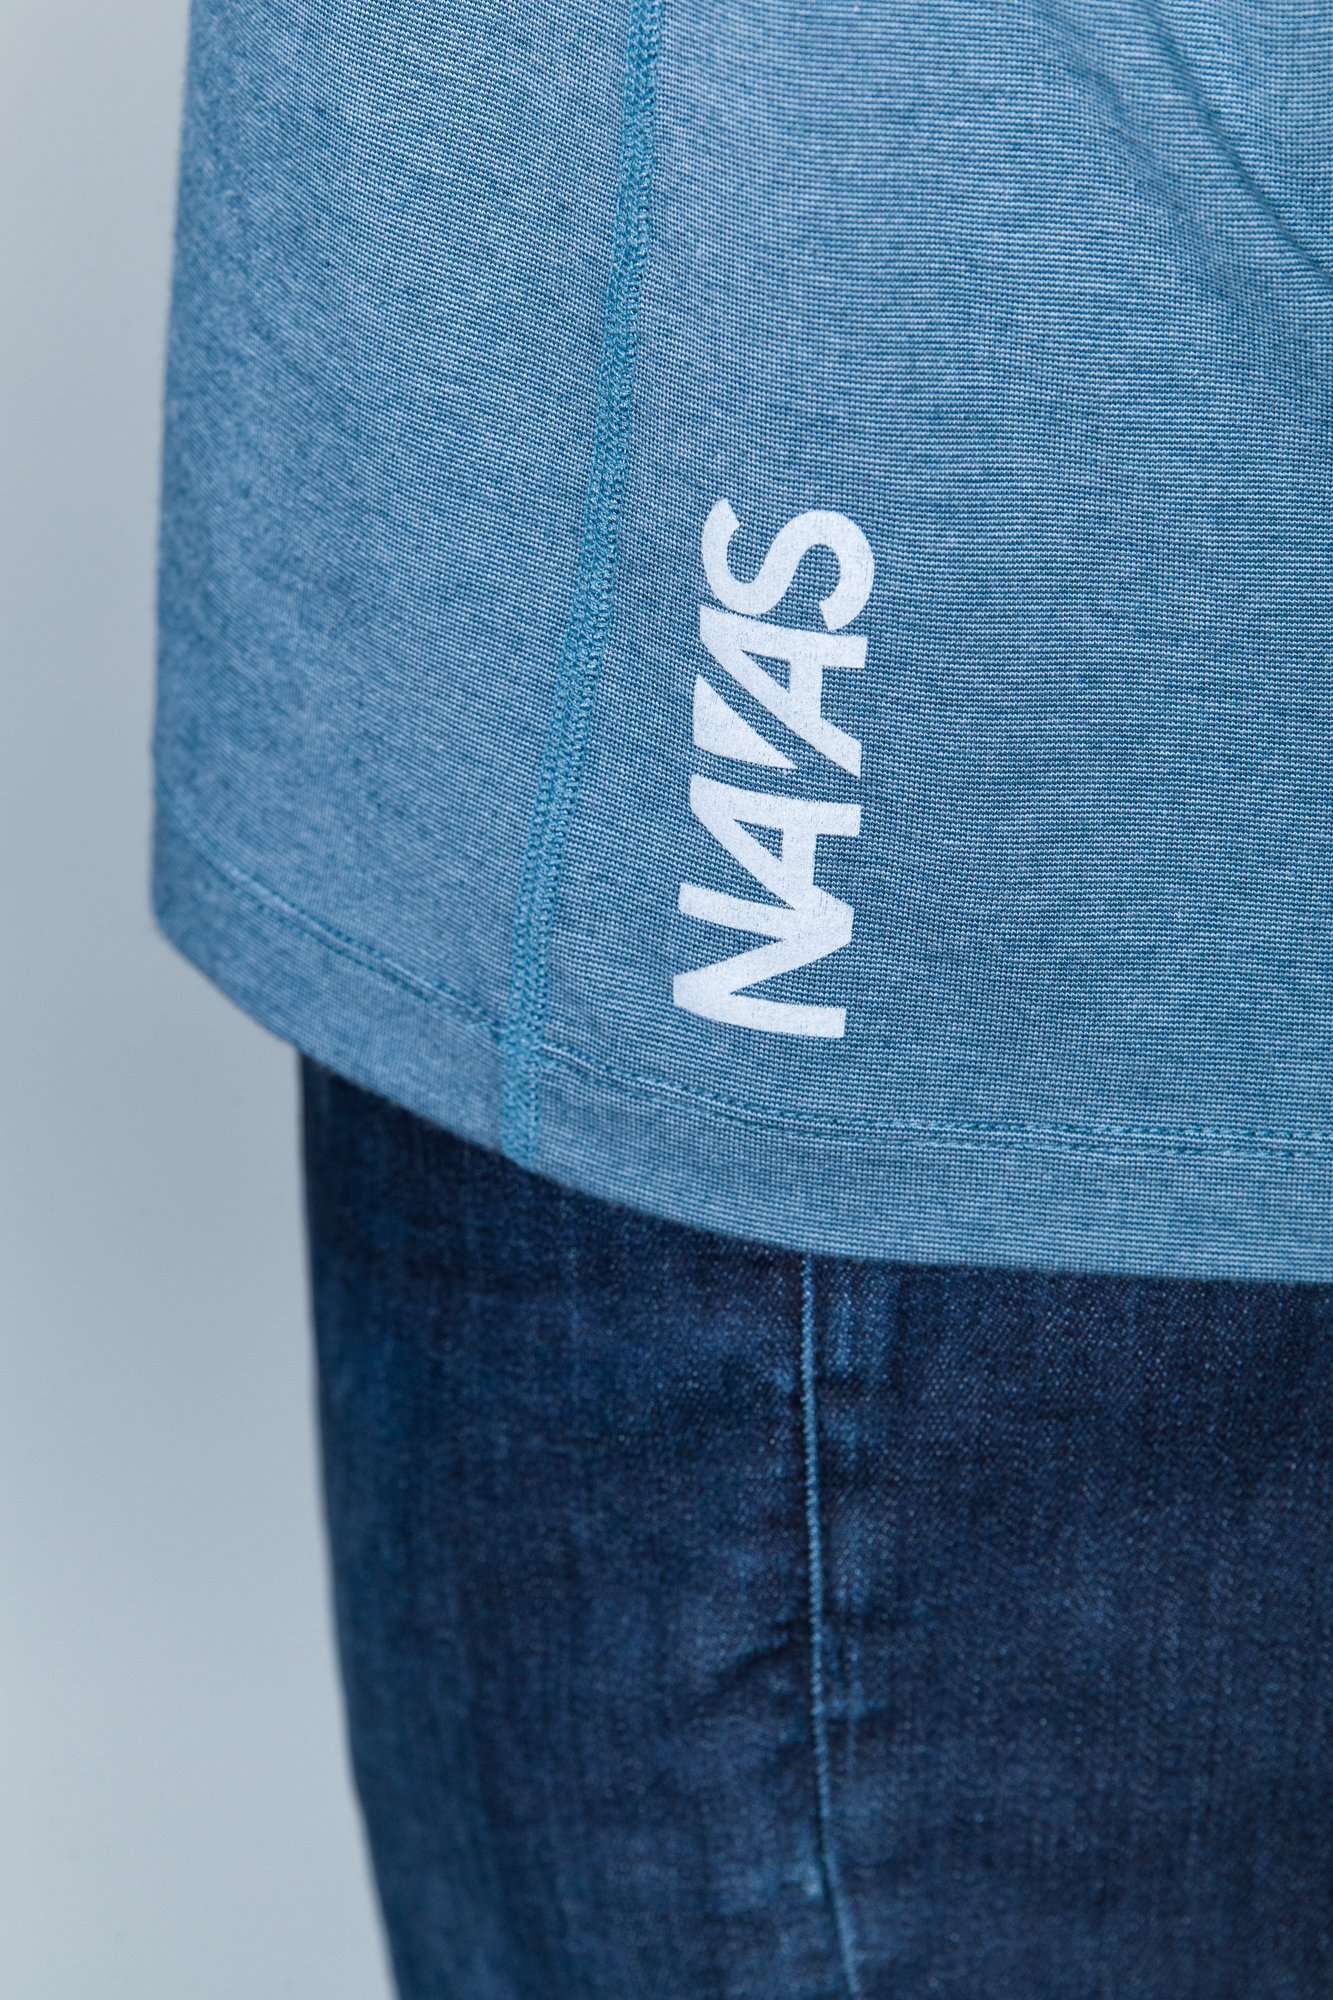 Navas Lab Crowe microstripe tall tee in light blue with logo detail. Long T-shirt for tall guys for everyday use.